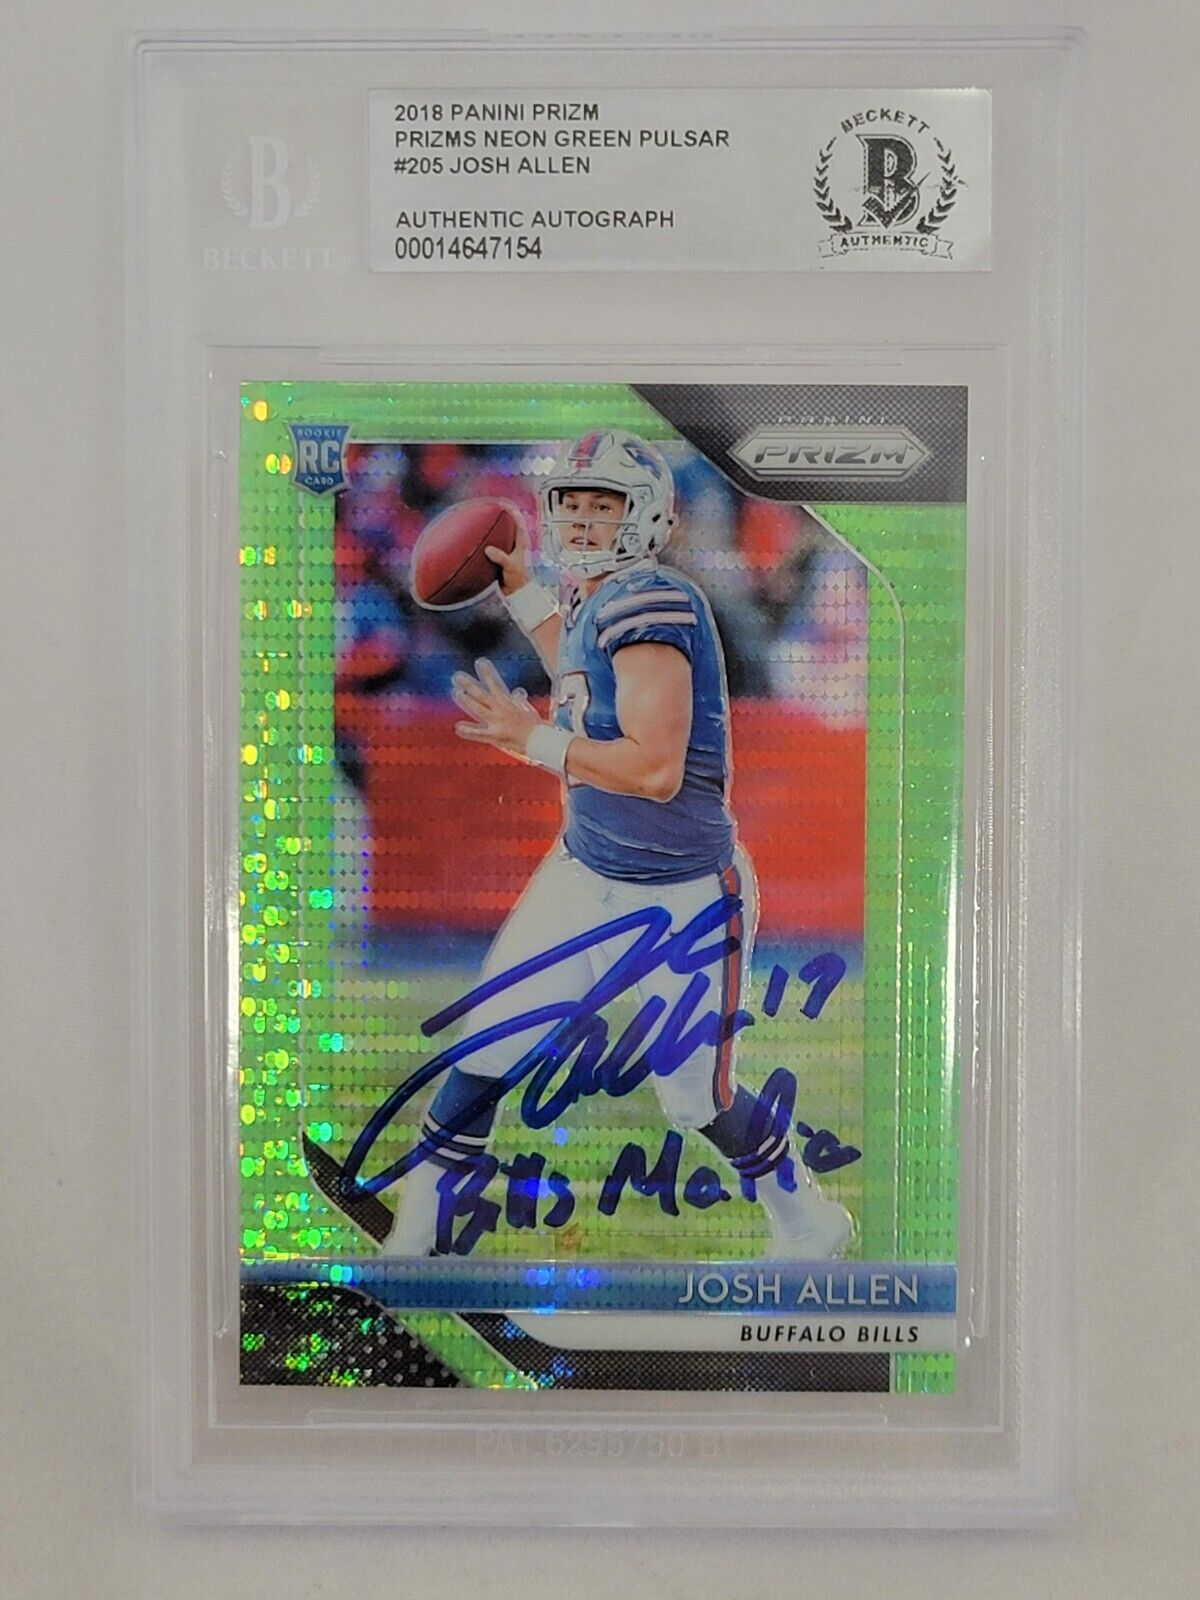 Primary image for Josh Allen (Bills) Signed 2018 Panini Prizms Neon Green Pulsar #205 Rookie Card